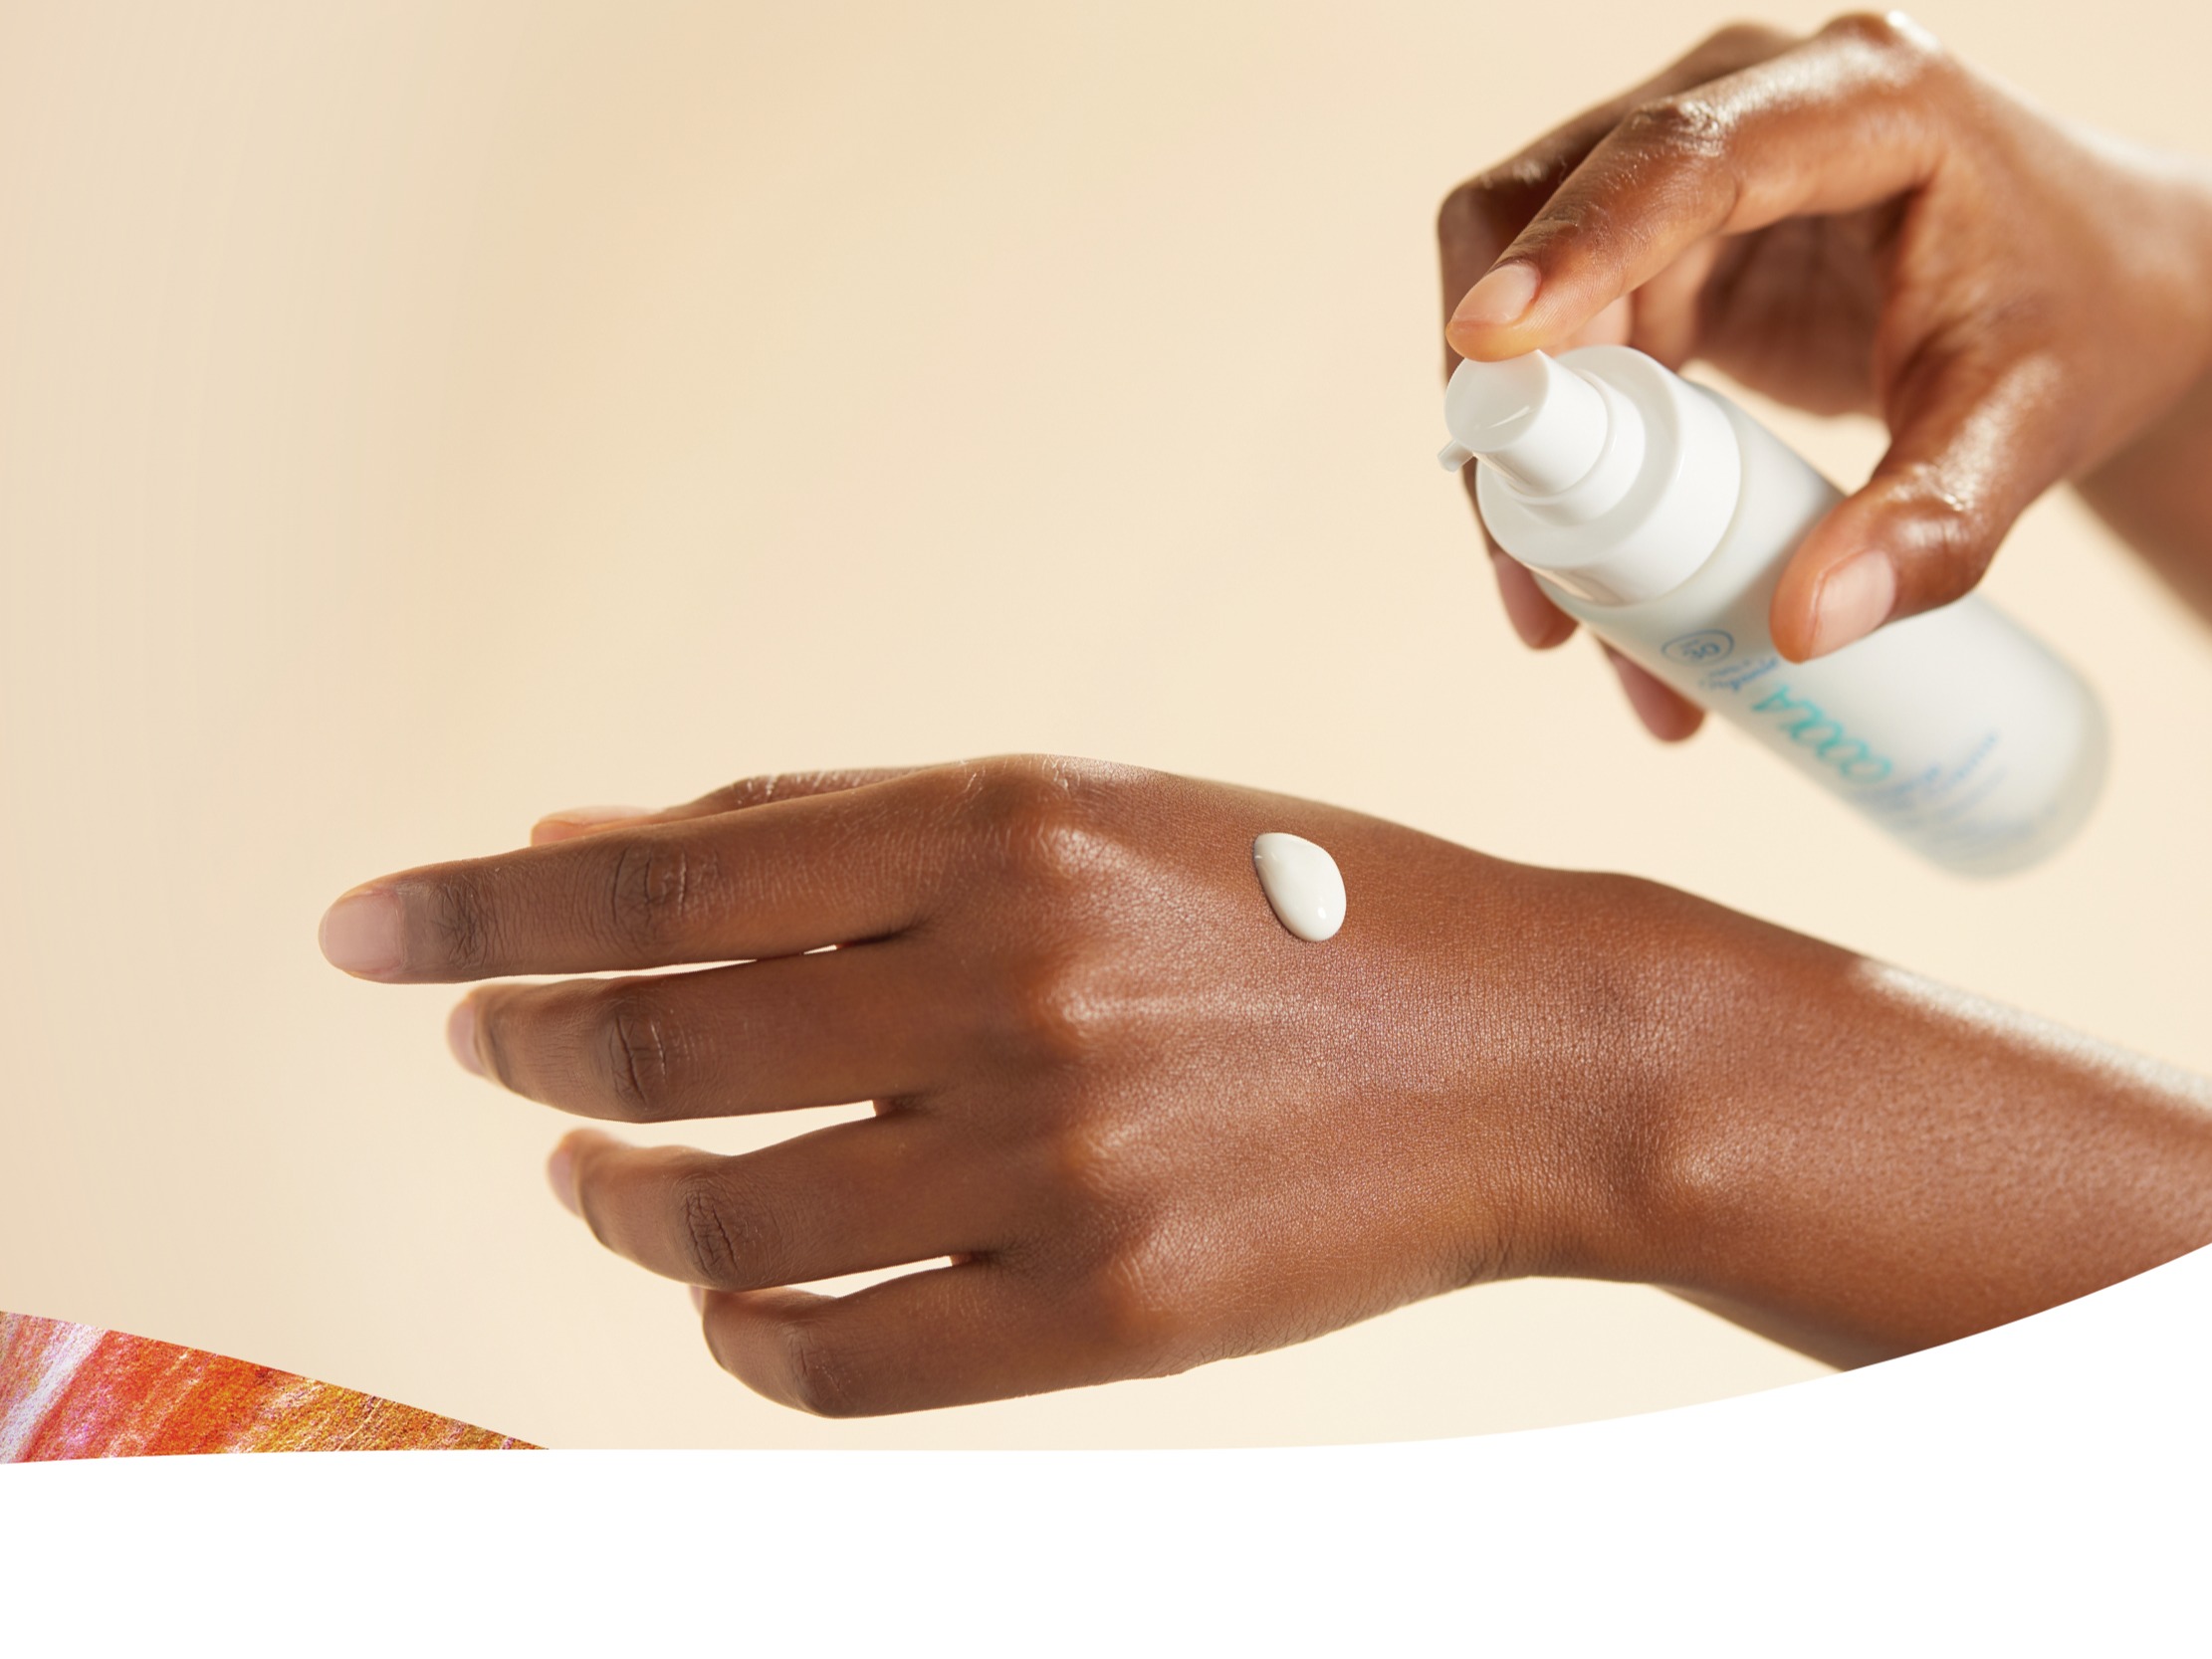 Image of someone holding lotion bottle dripping a bit on skin of other hand